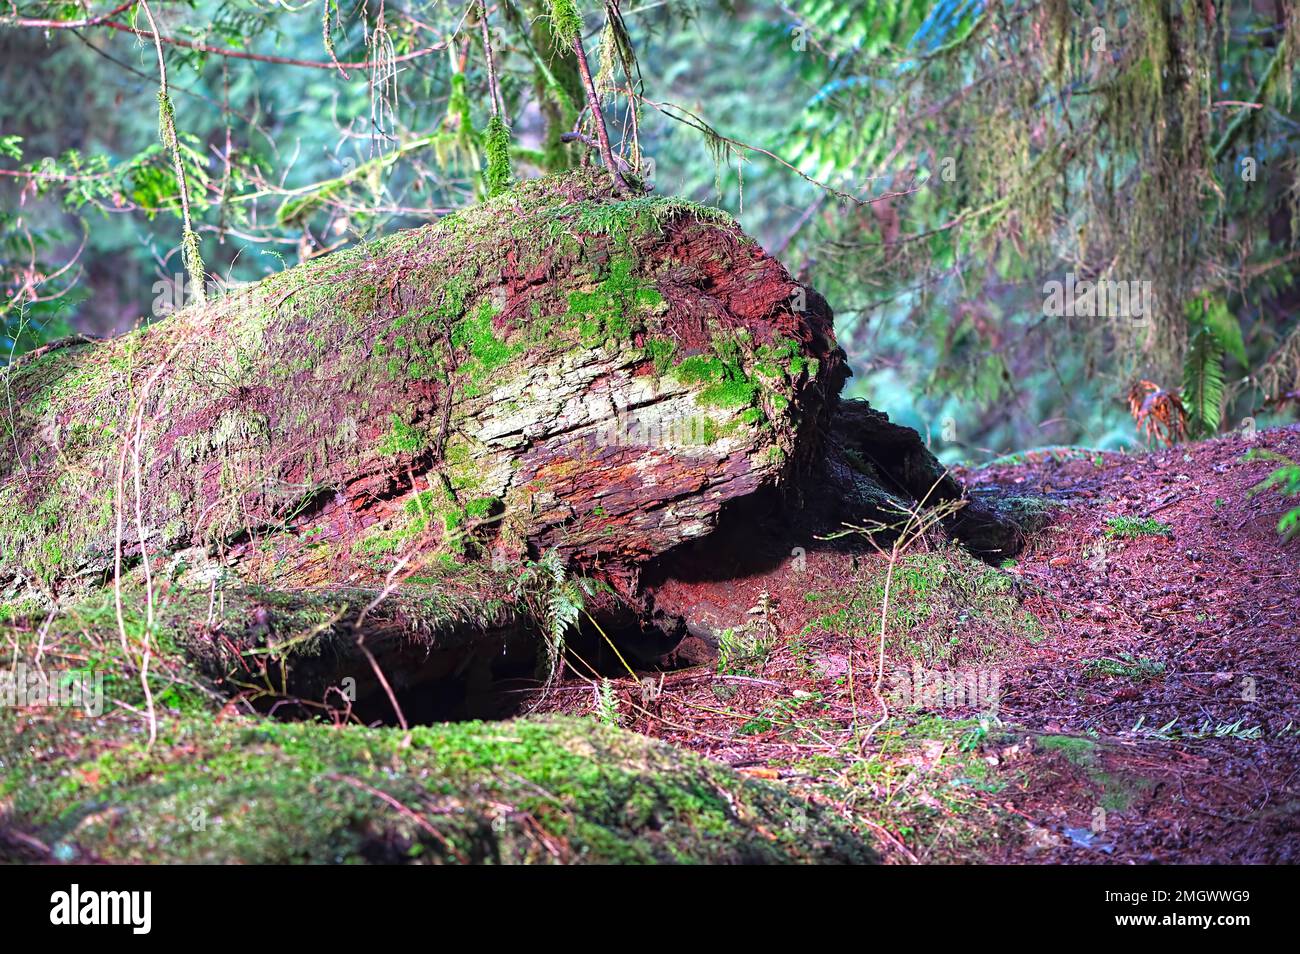 Western red cedar tree (Thuja plicata) - fallen and decaying with moss and lichen growing on it.  Maple Ridge, British Columbia, Canada. Stock Photo